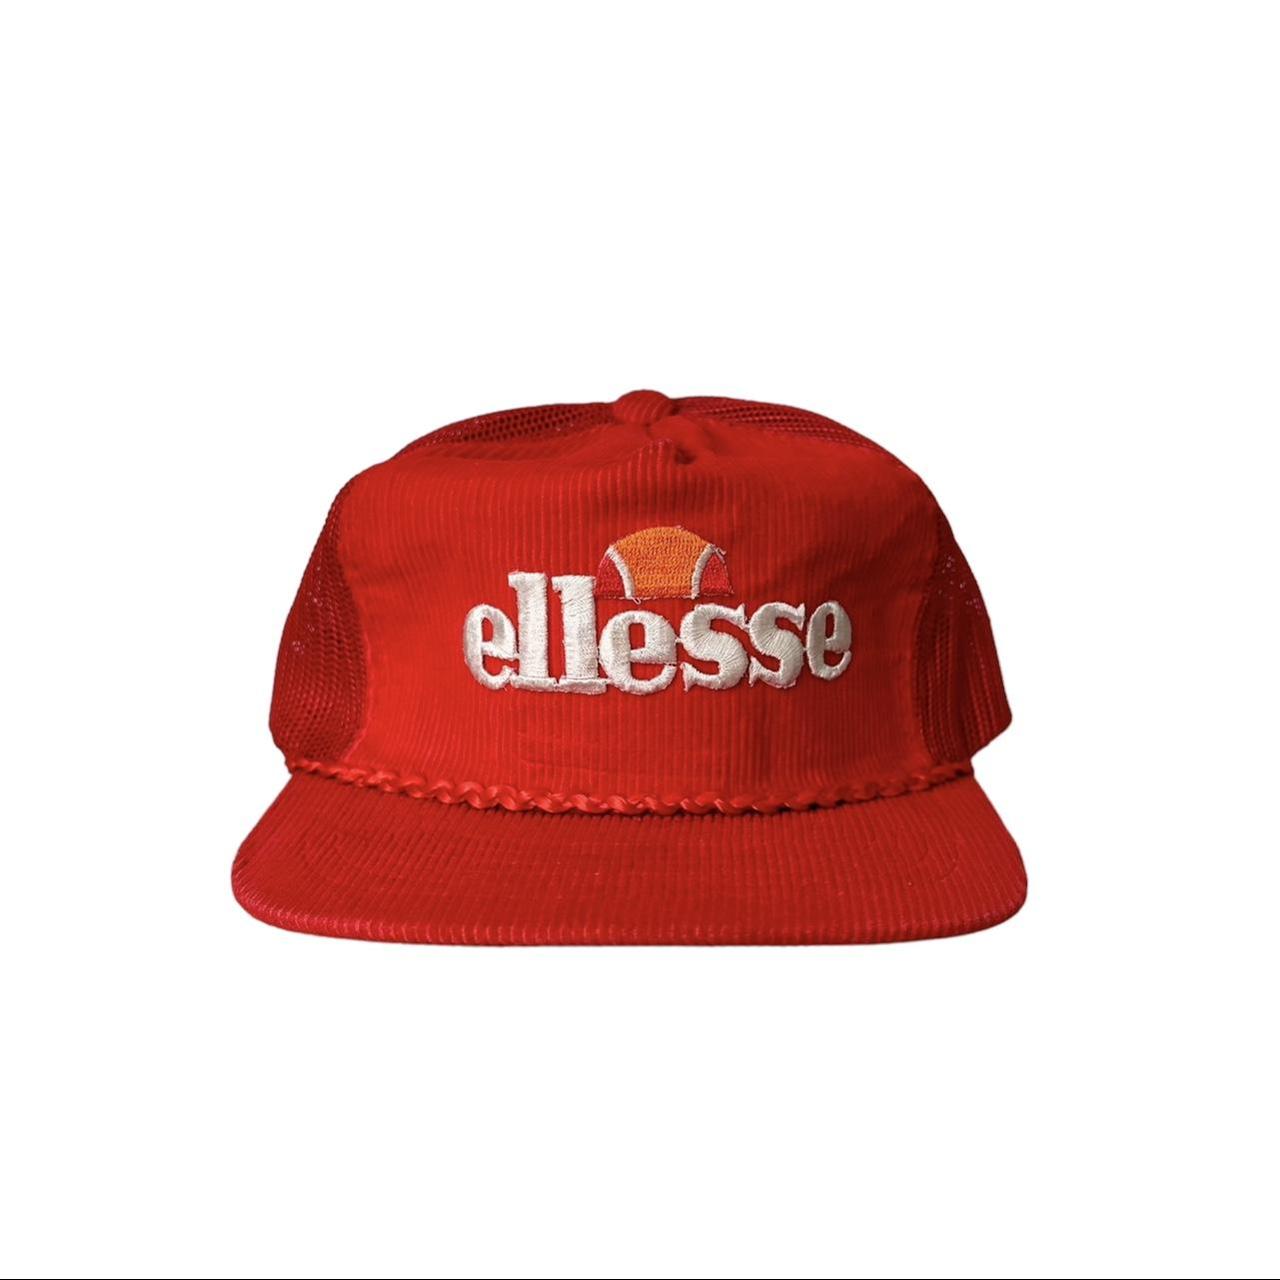 Ellesse Men's Red and White Hat